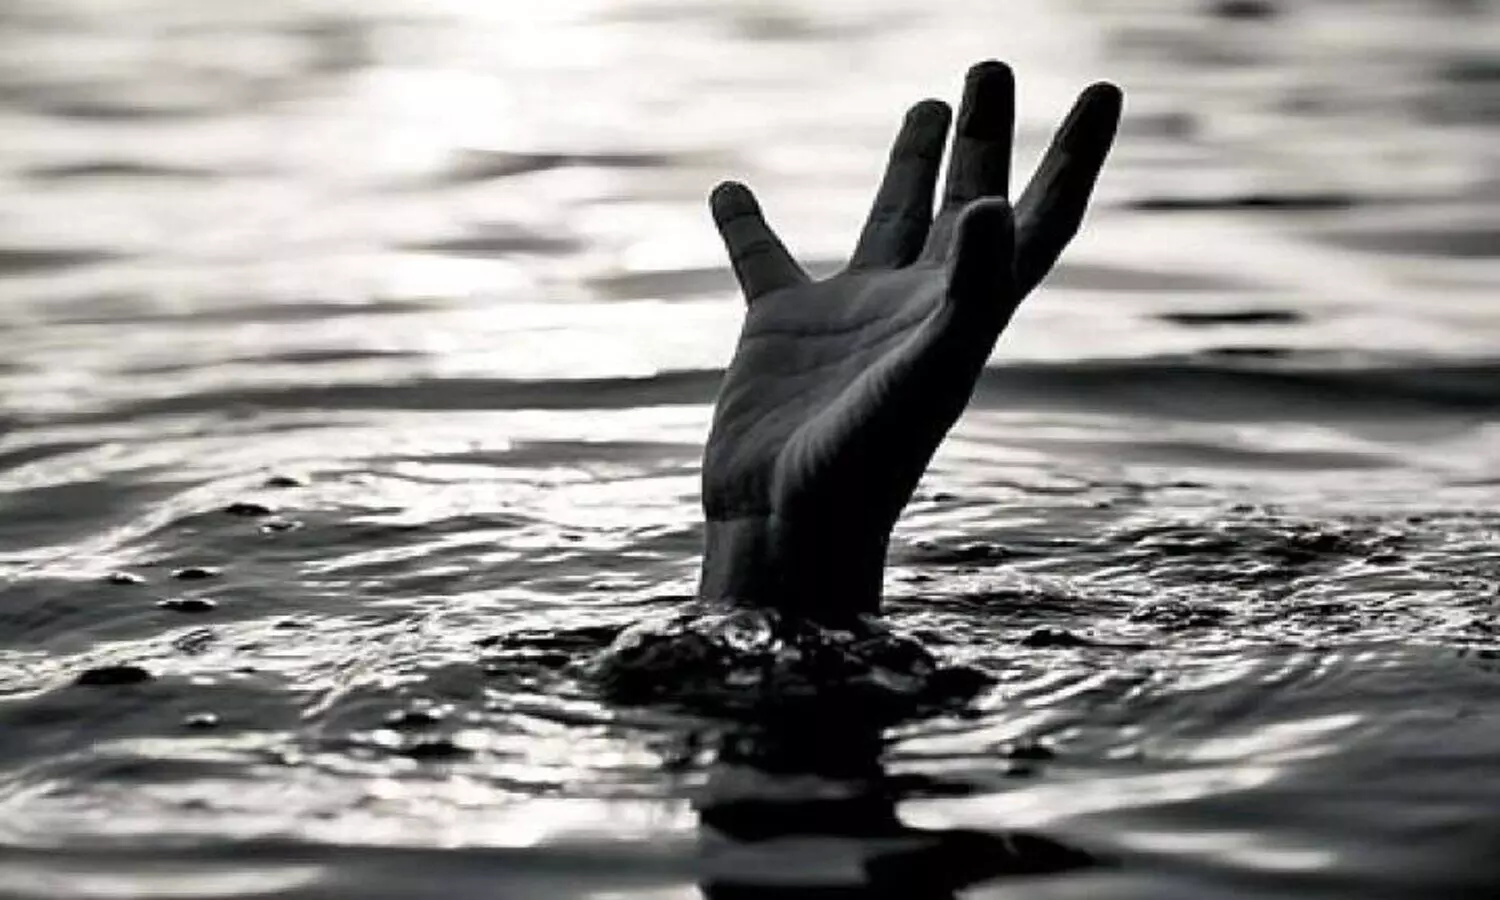 four death by drowning ganga river